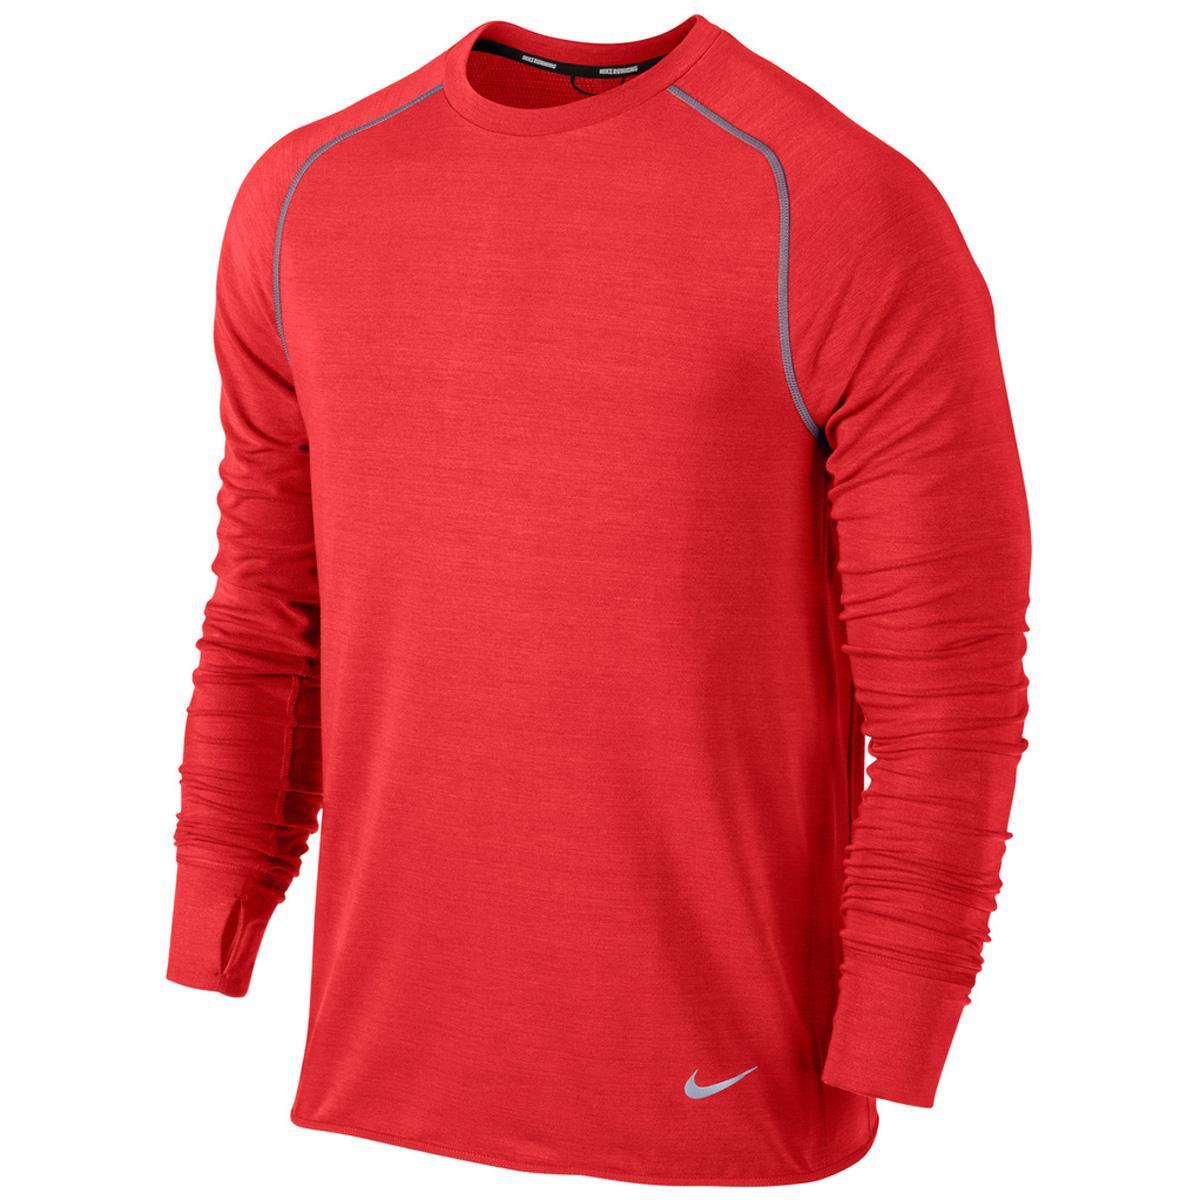 Nike Mens Dri-FIT Sprint Long Sleeve Crew - Red/Reflective Silver ...